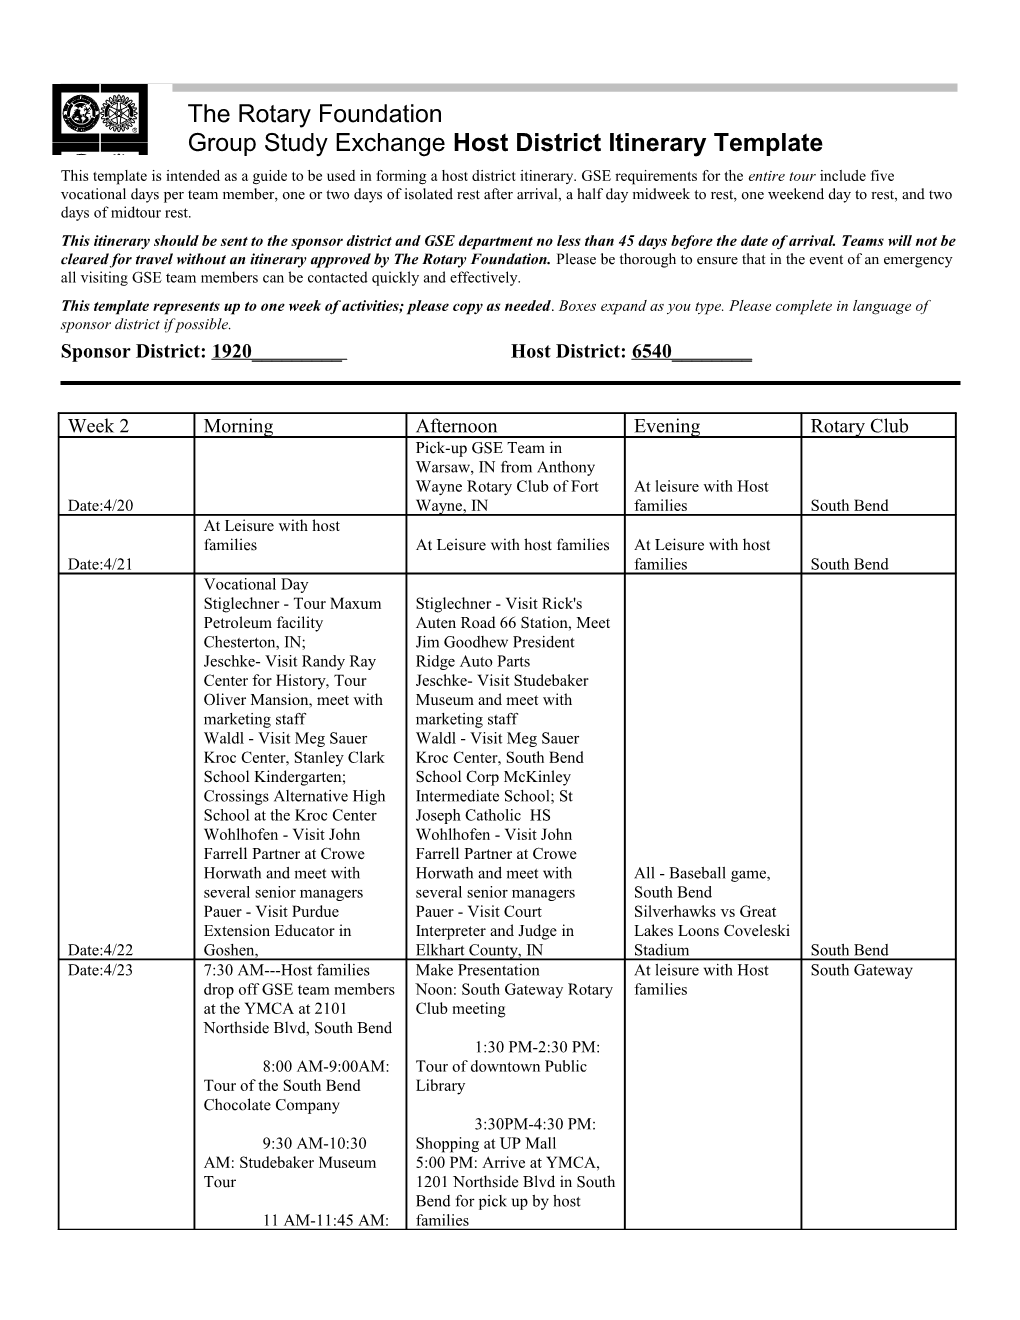 Group Study Exchange (GSE) Host District Itinerary Template